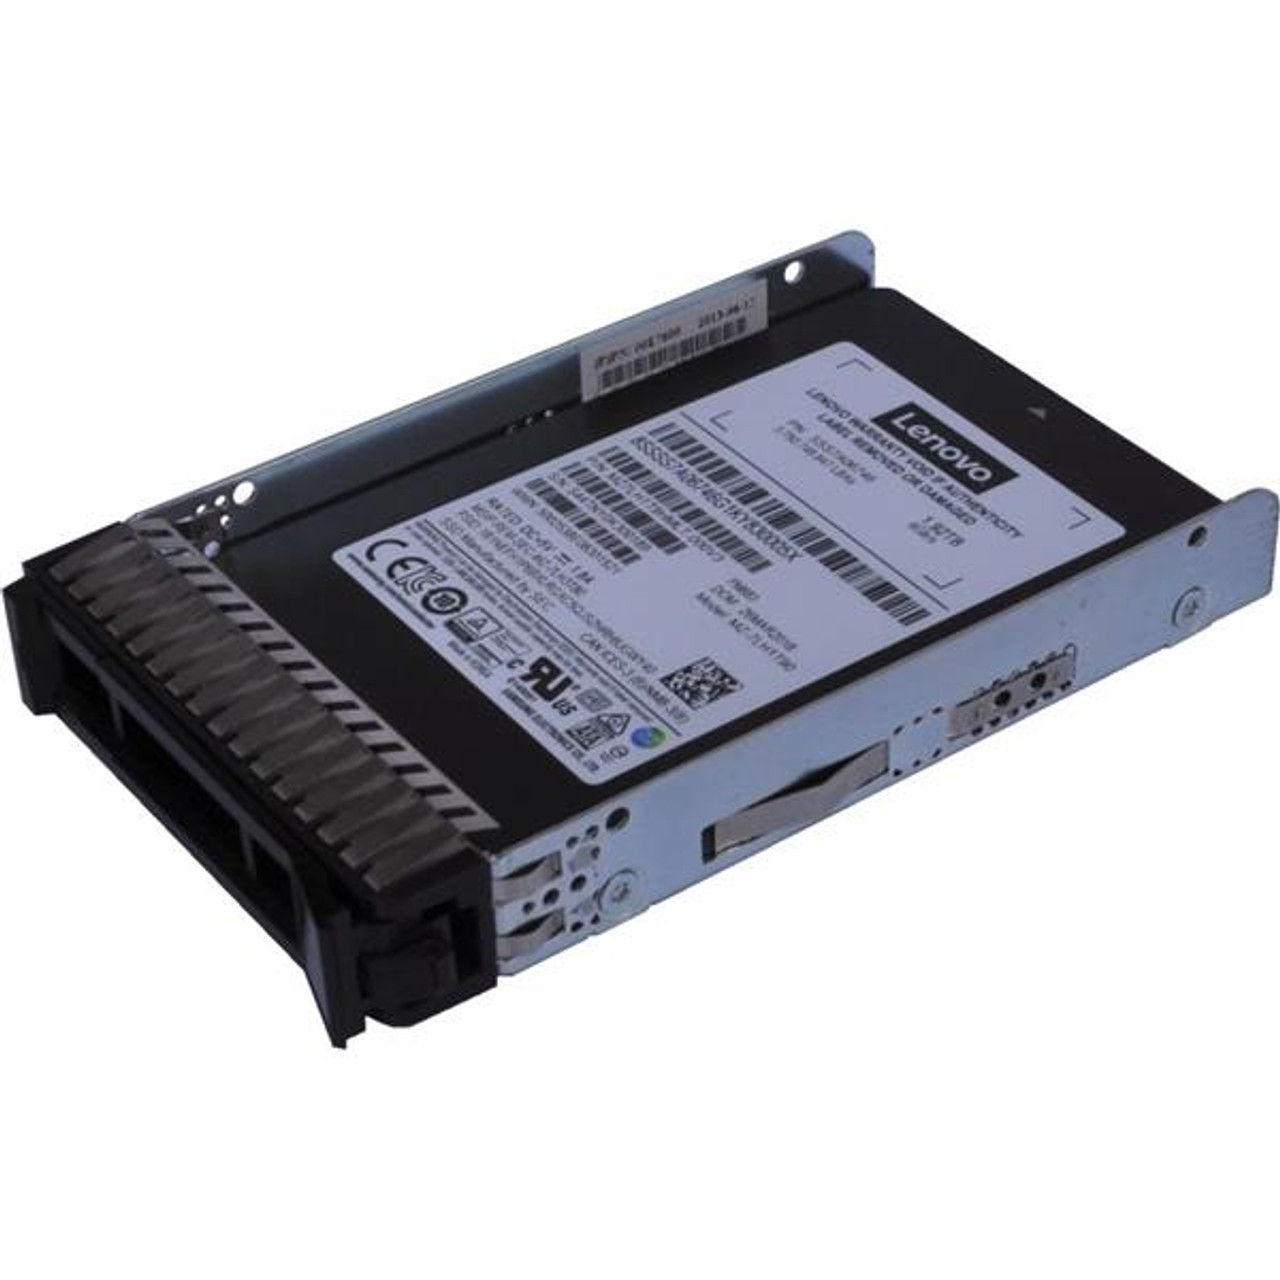 01KN733 Lenovo 1.92TB SAS 12Gbps Read Intensive Hot-Swap 2.5-inch Internal Solid State Drive (SSD)